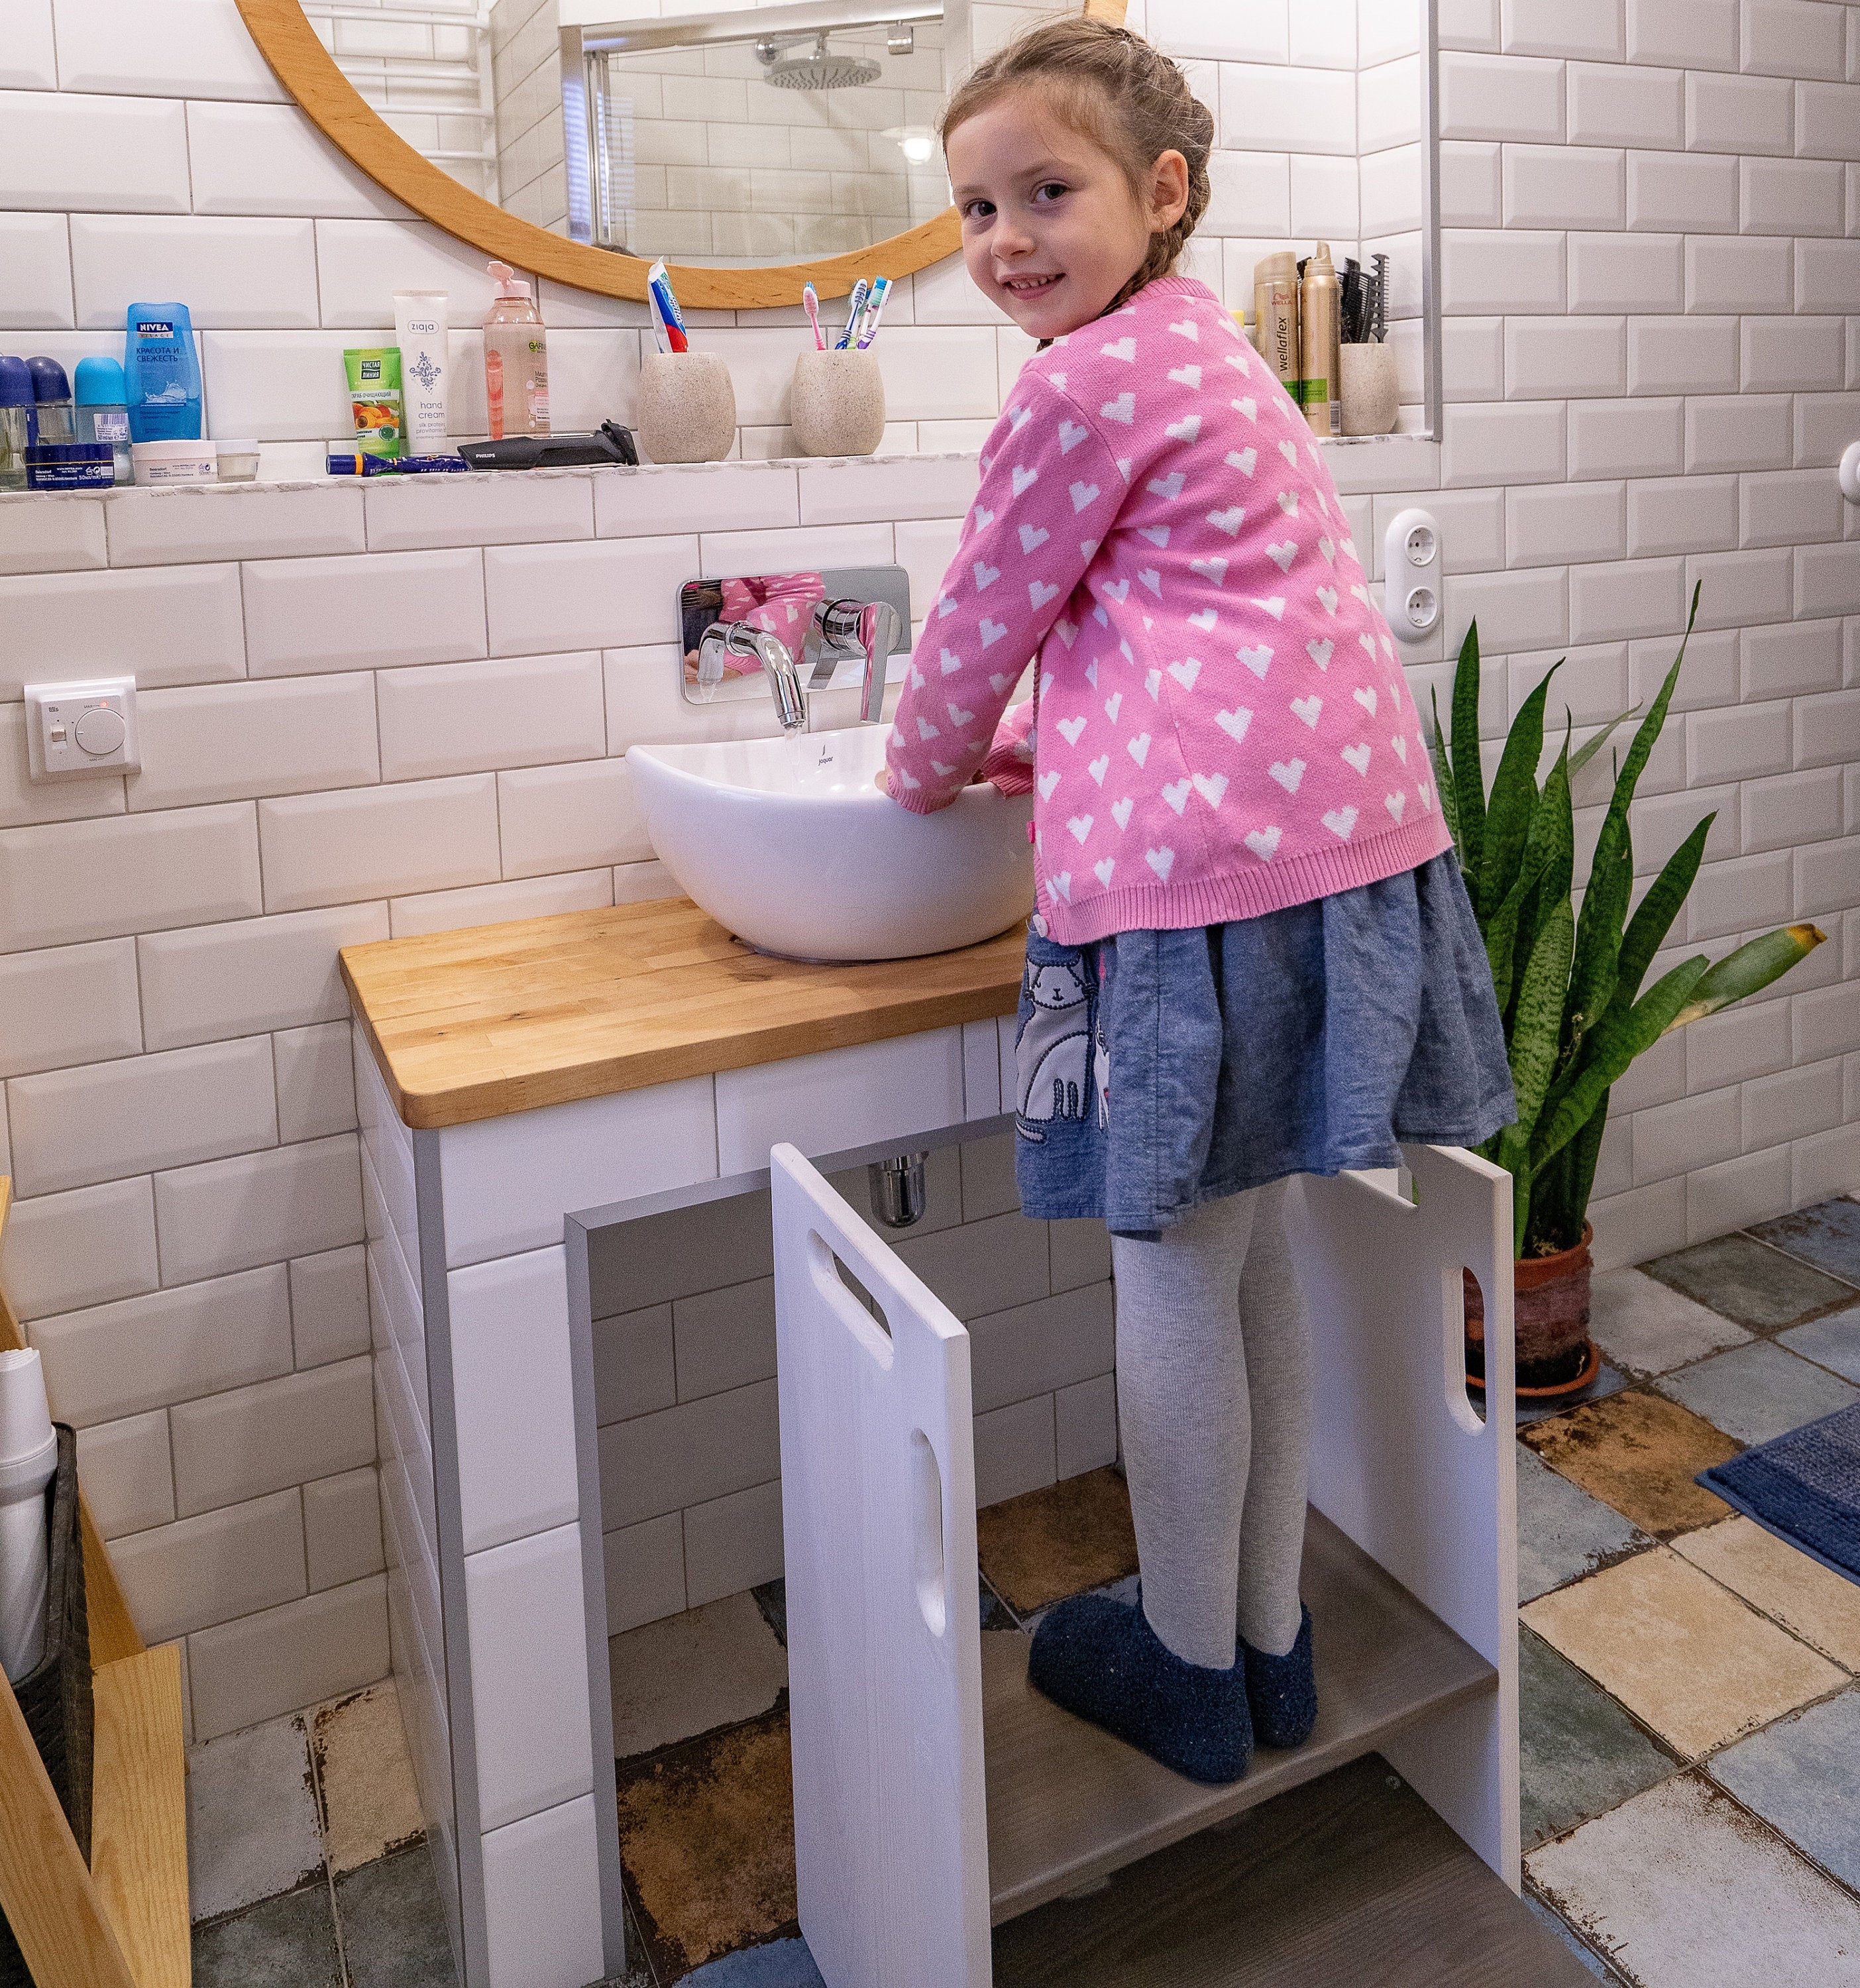 Kids Bathroom And Toilet Step Stool Kids Tower - Perfect Potty And Personal Hygiene And Hand Washing Aide For Toddlers - Squat Poop Stoop